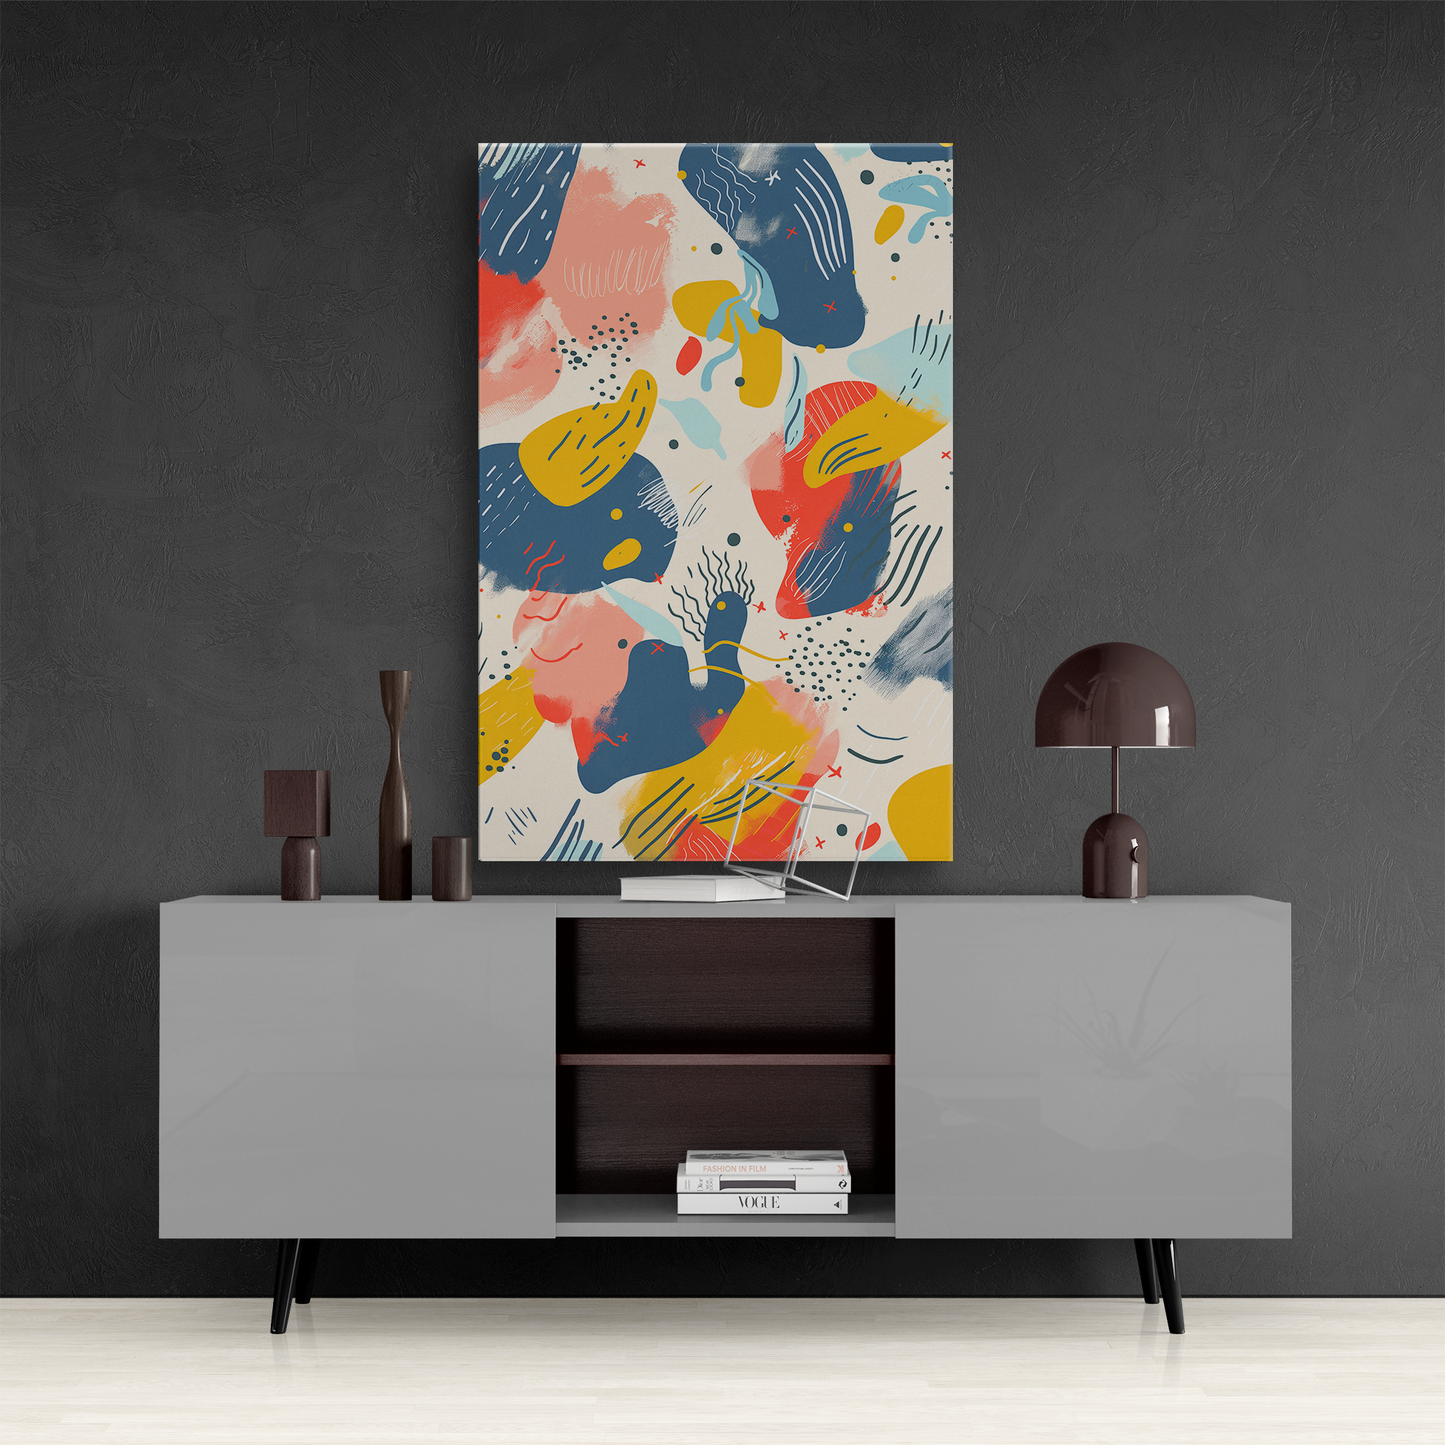 Abstract Play (Canvas)Modern abstract art with bold splashes of color on canvas prints. Shop now for innovative products designed to enhance your digital lifestyle. Fast shipping!RimaGallery